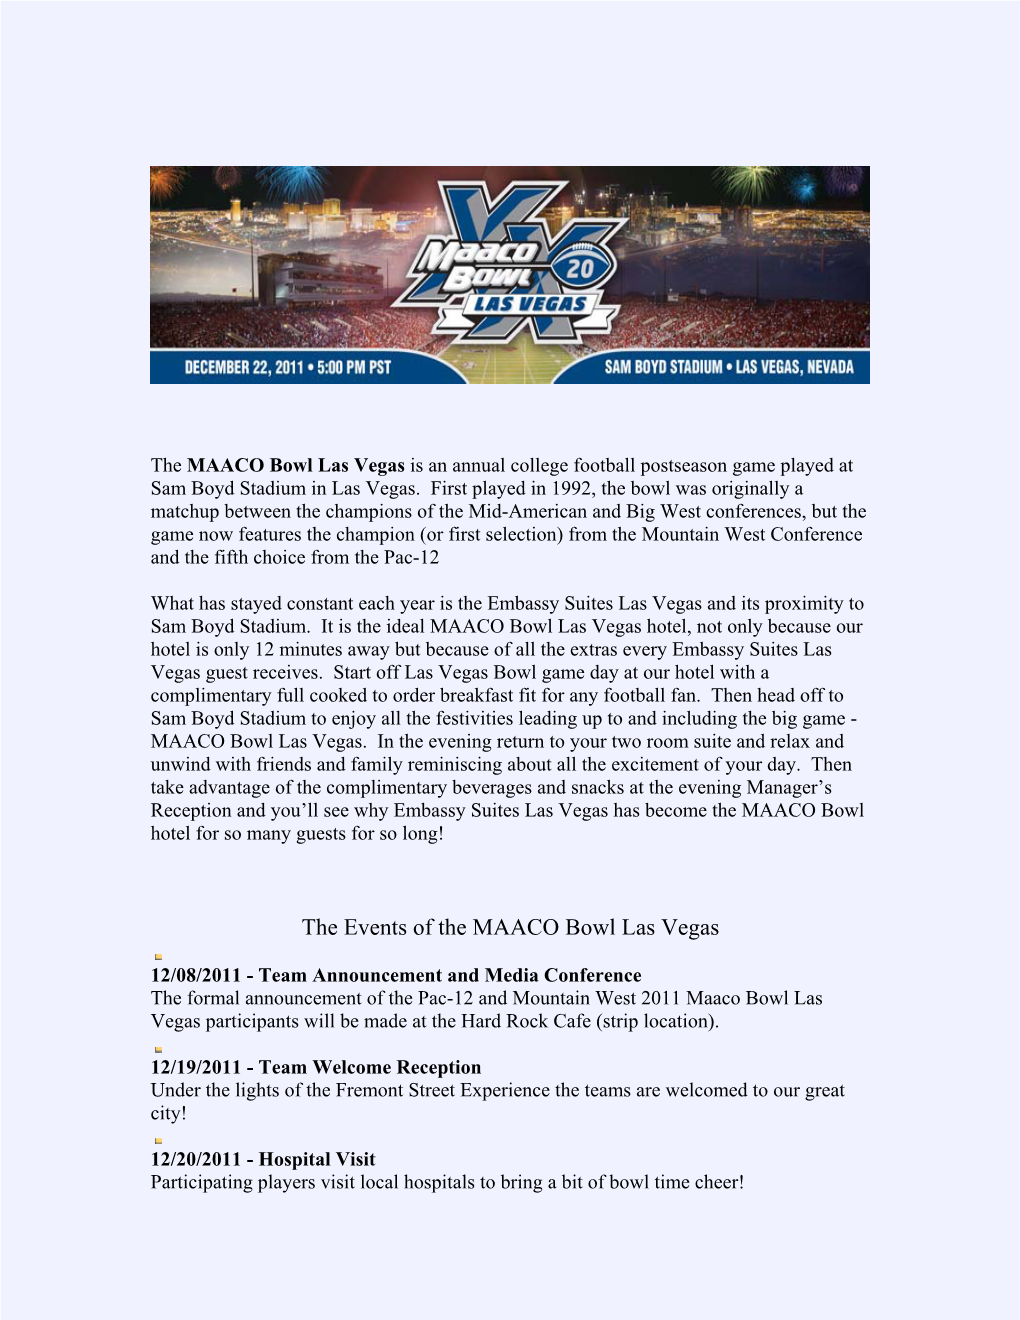 The Events of the MAACO Bowl Las Vegas